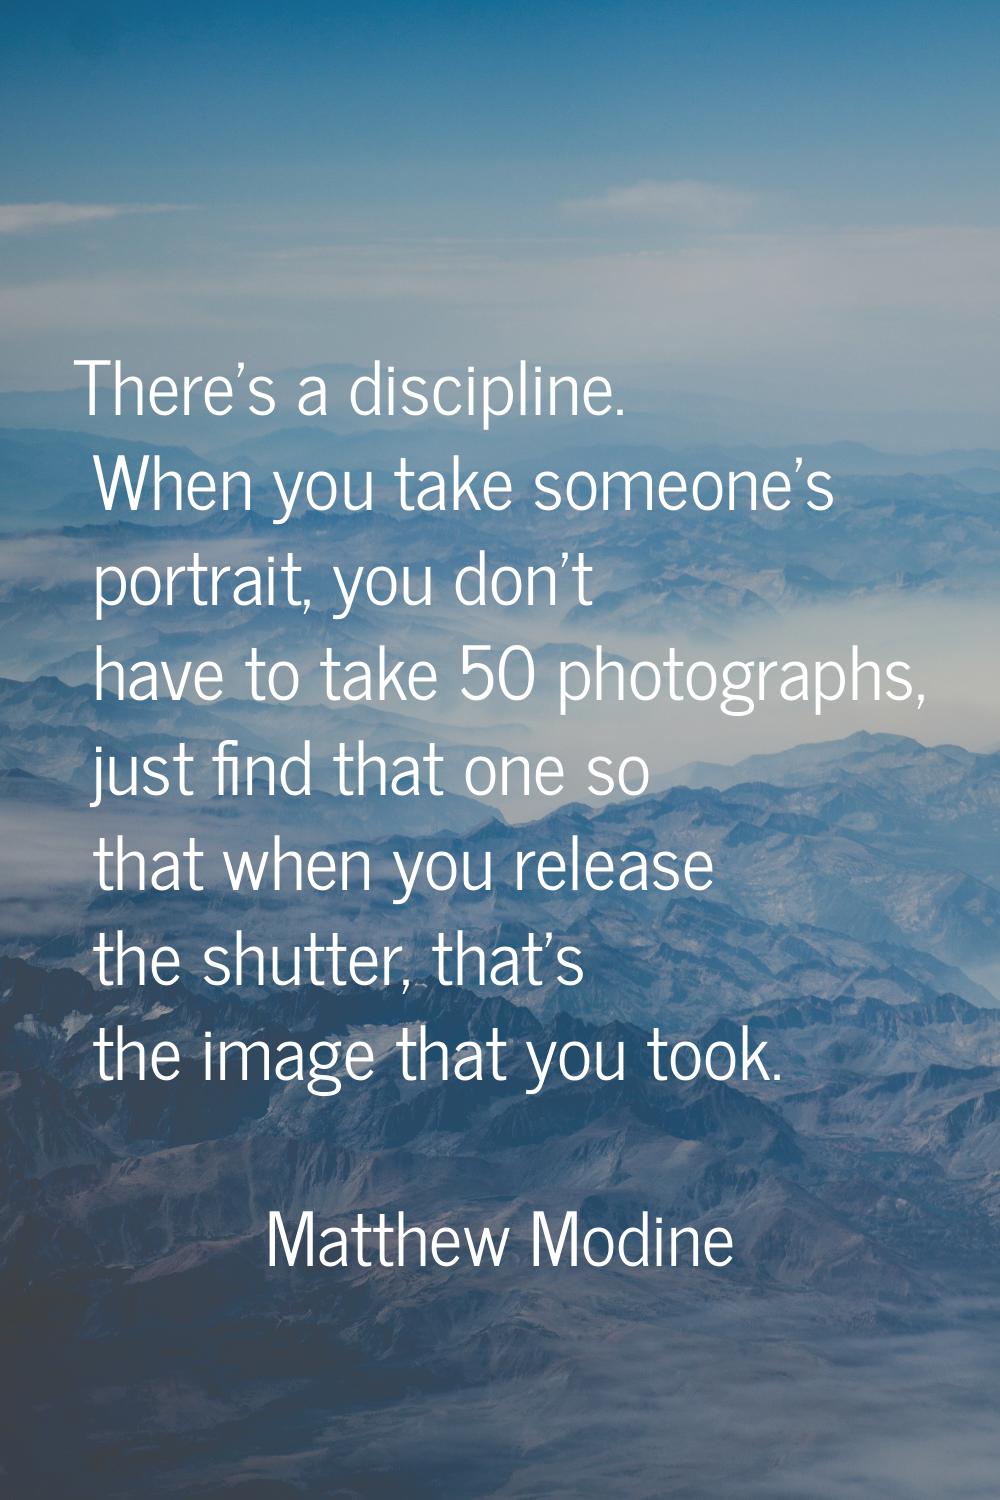 There's a discipline. When you take someone's portrait, you don't have to take 50 photographs, just